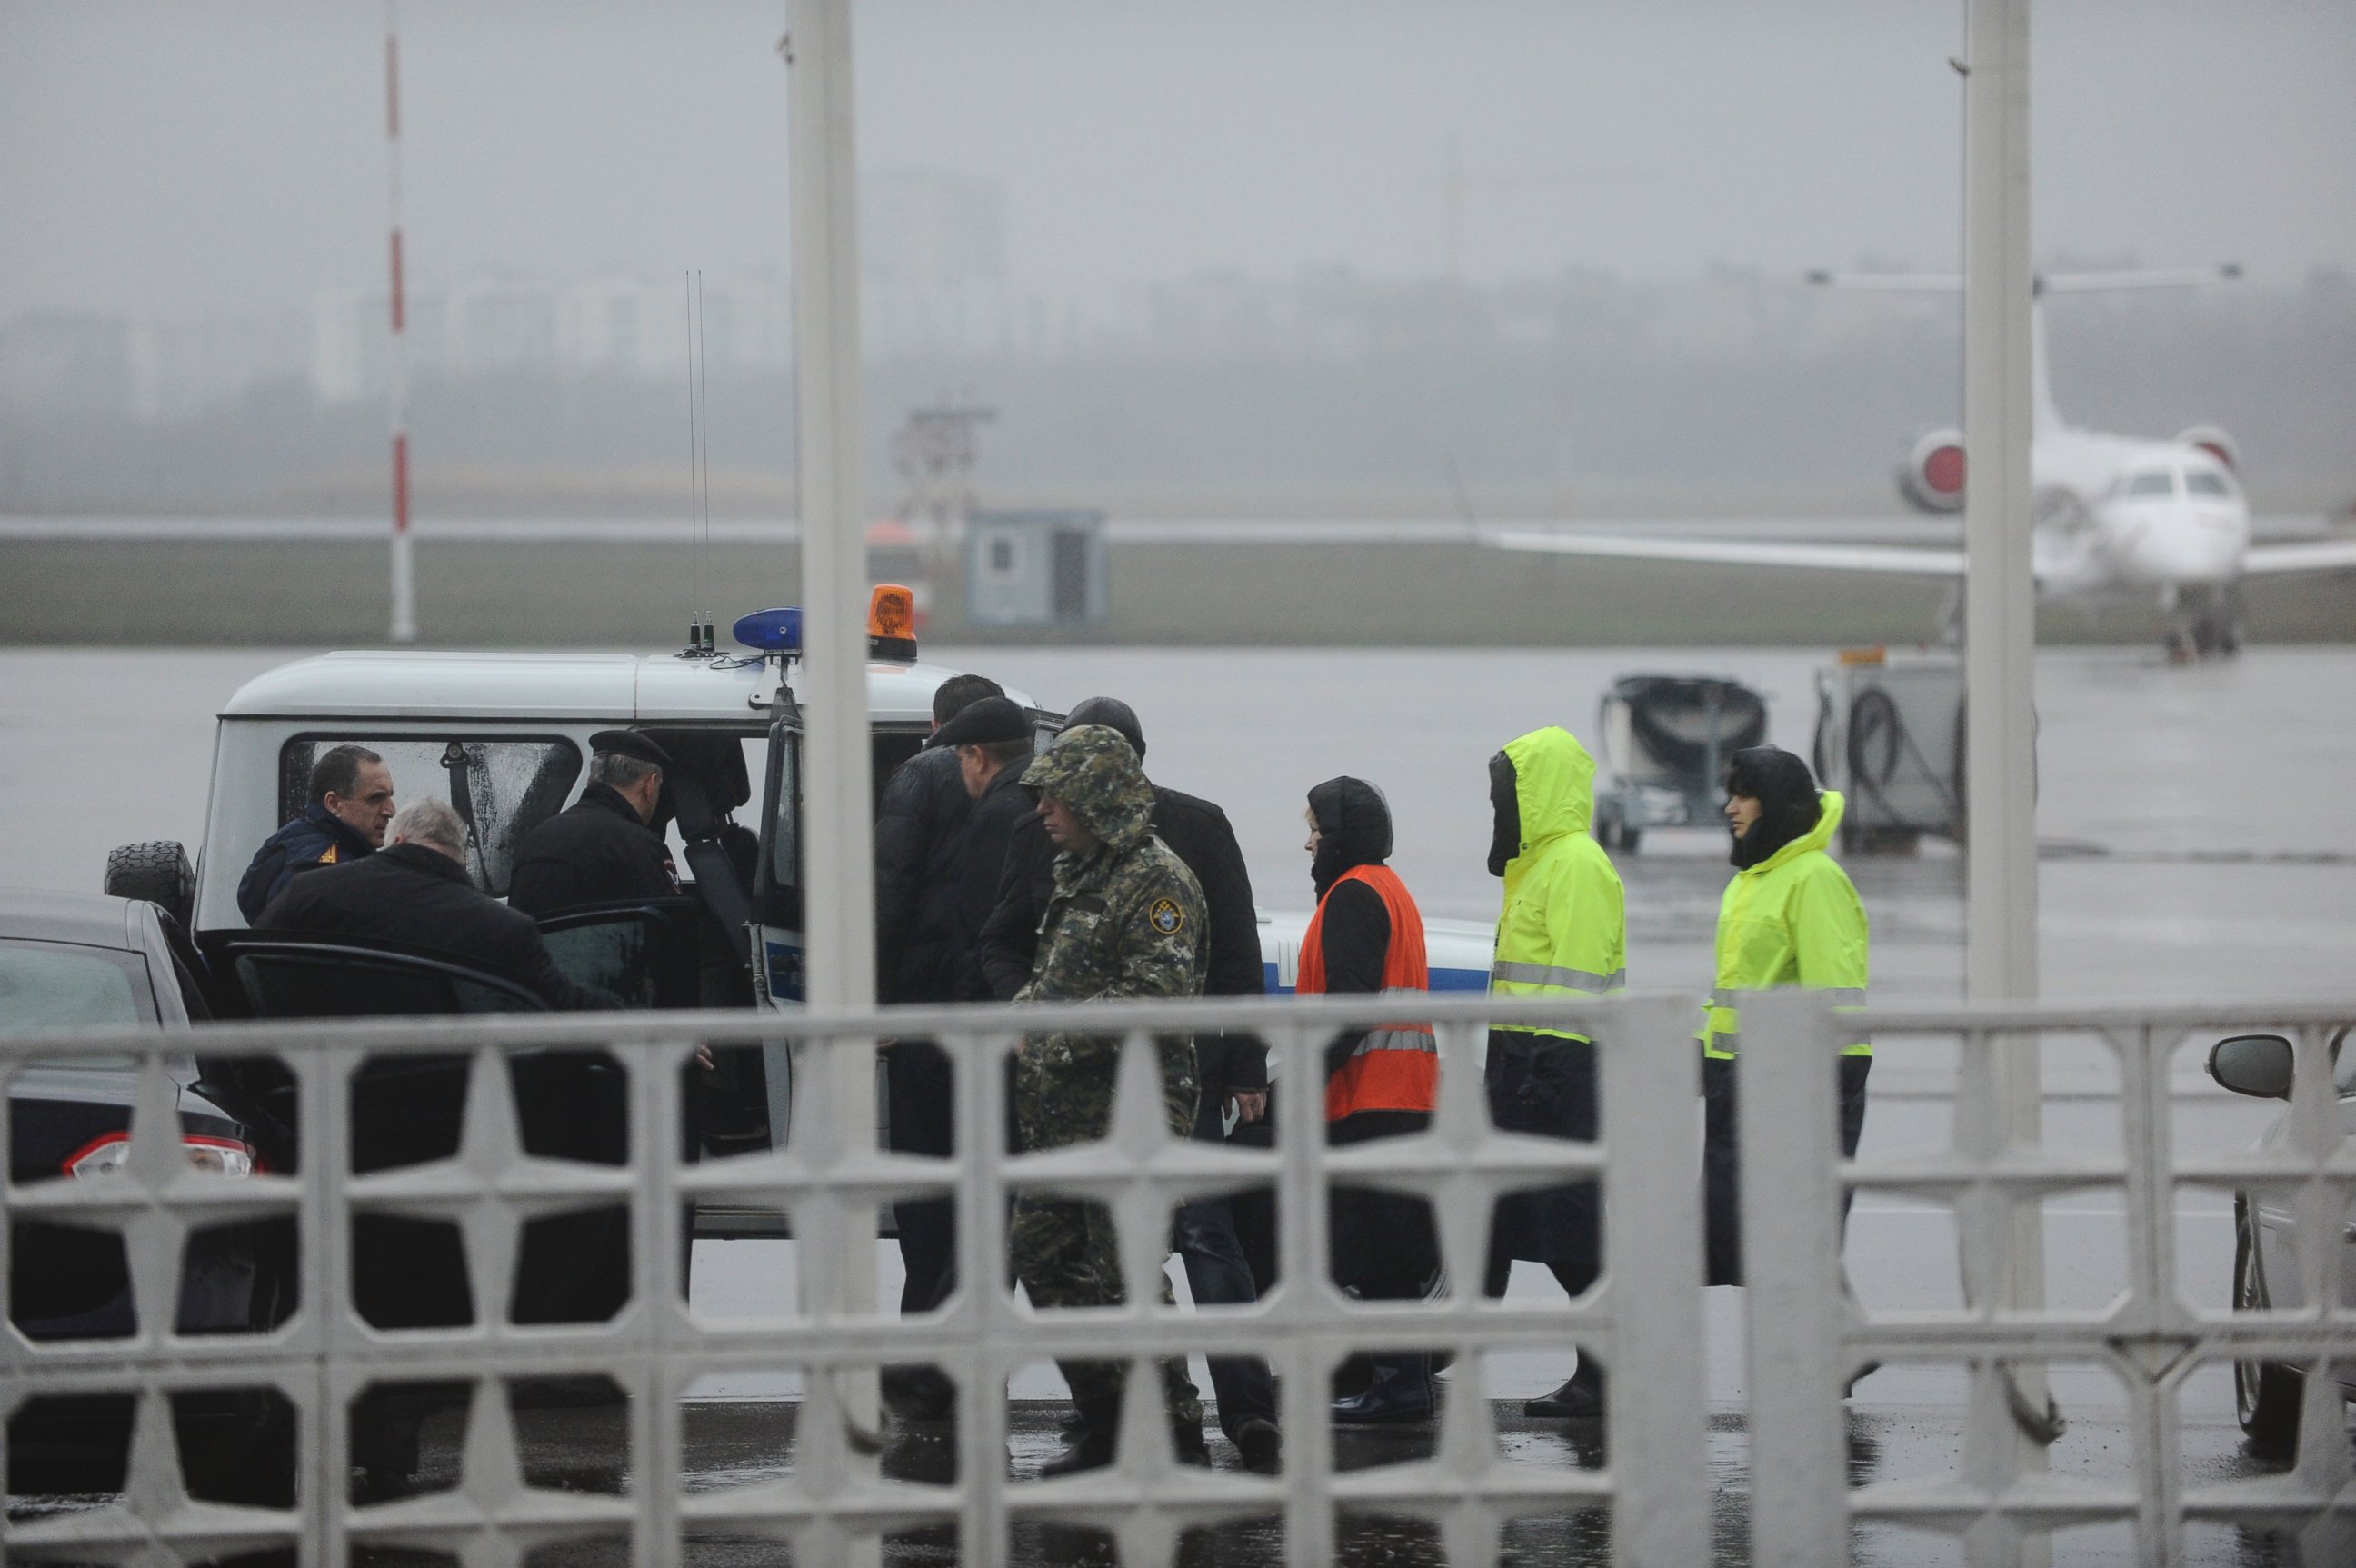 PHOTO: Russian Emergency Situations Ministry employees and police officers are seen as they take a car to drive to the area of the FlyDubai flight 981 crash site at the Rostov-on-Don airport on Saturday, March 19, 2016. 